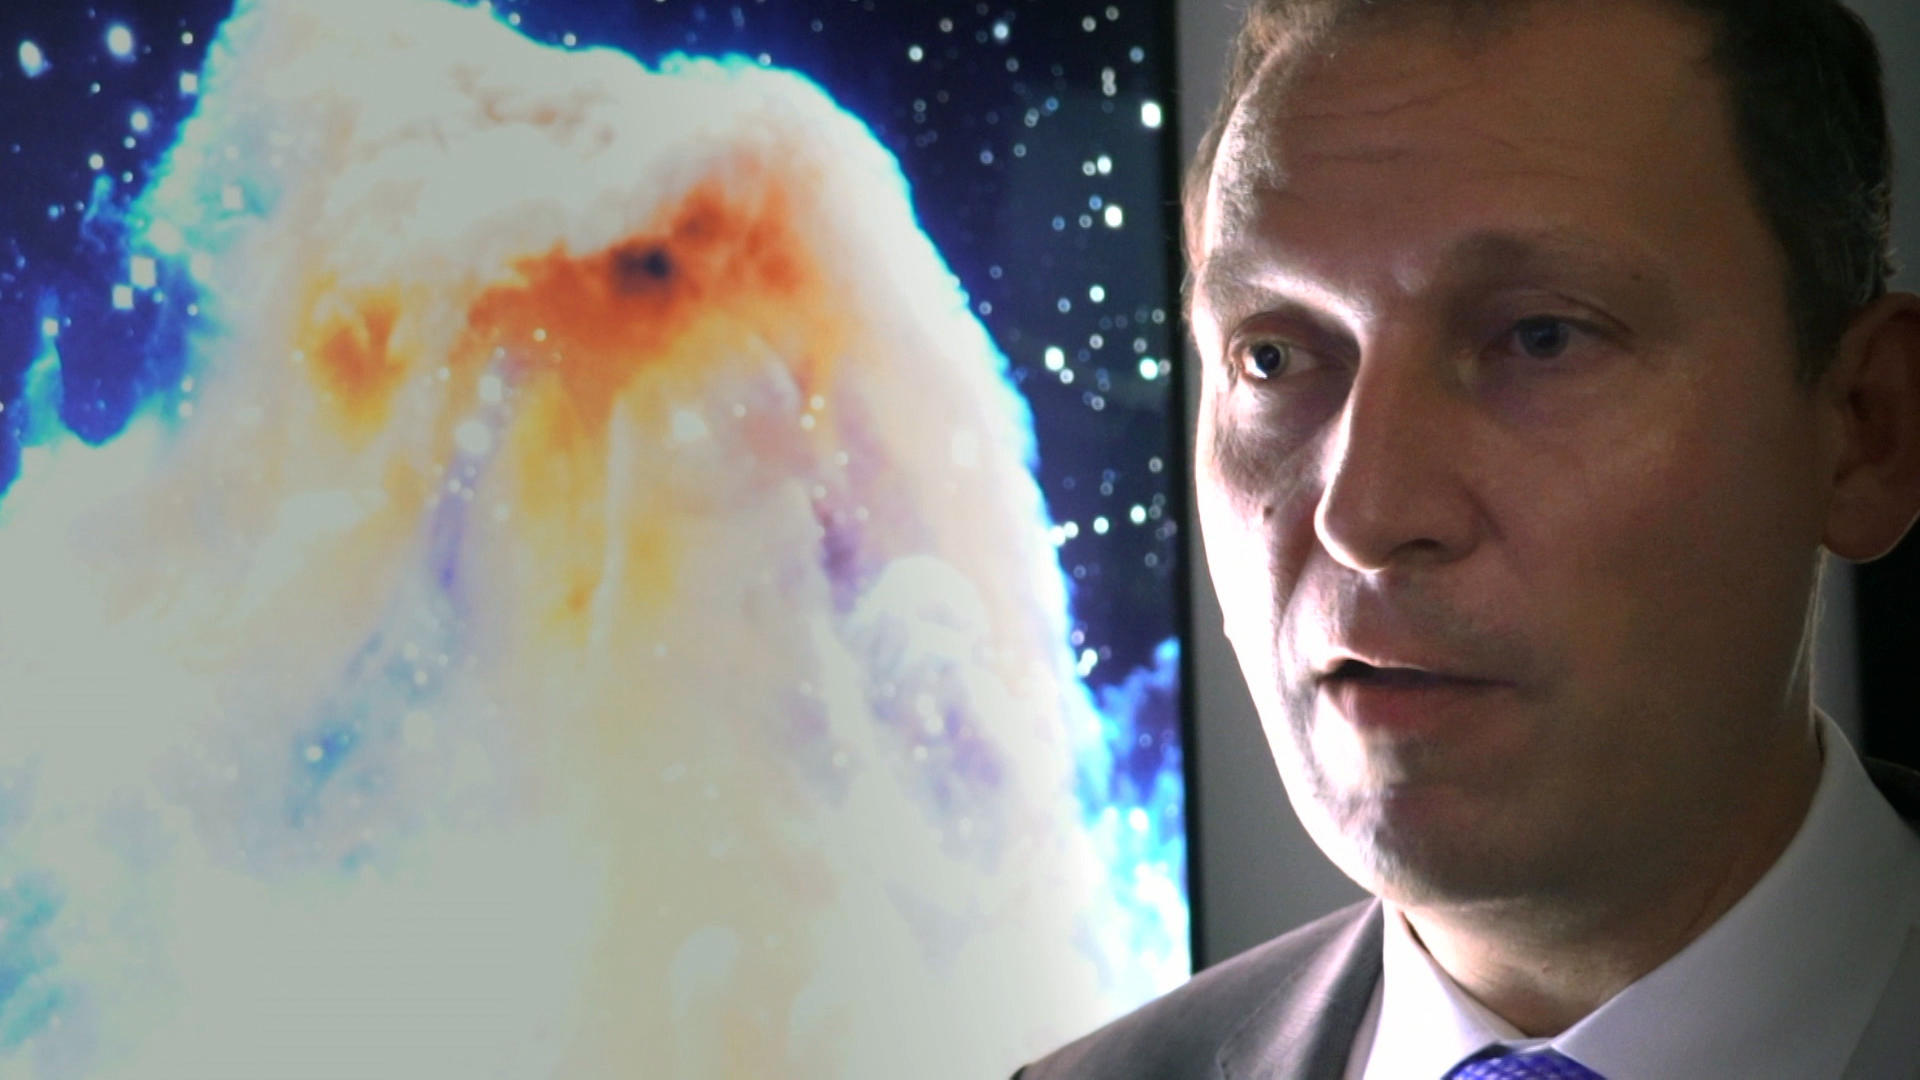 Thomas Zurbuchen standing in front of poster showing a galaxy.